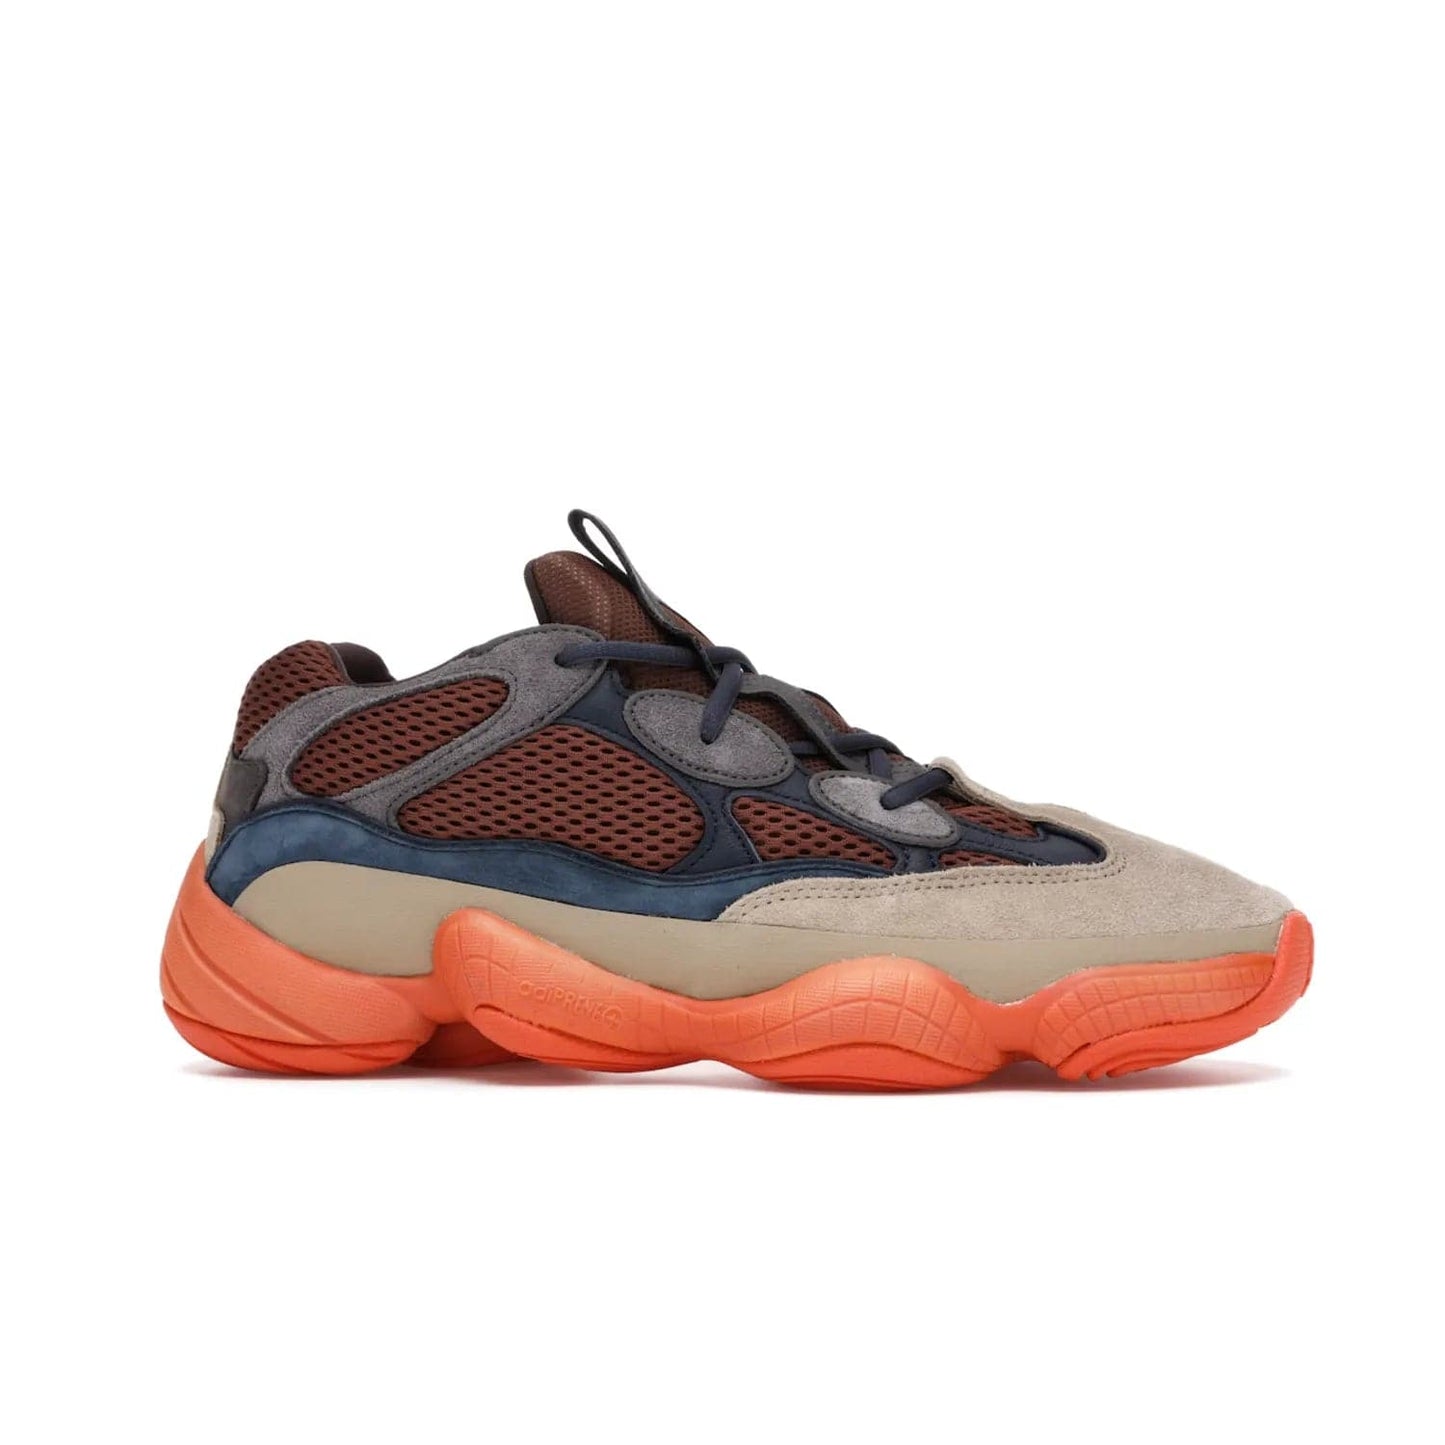 adidas Yeezy 500 Enflame - Image 2 - Only at www.BallersClubKickz.com - Step into style with the adidas Yeezy 500 Enflame. Mix of mesh, leather, and suede layered together to create tonal-brown, dark blue, & orange. Orange AdiPRENE sole provides superior cushioning & comfort. Get yours and experience maximum style.